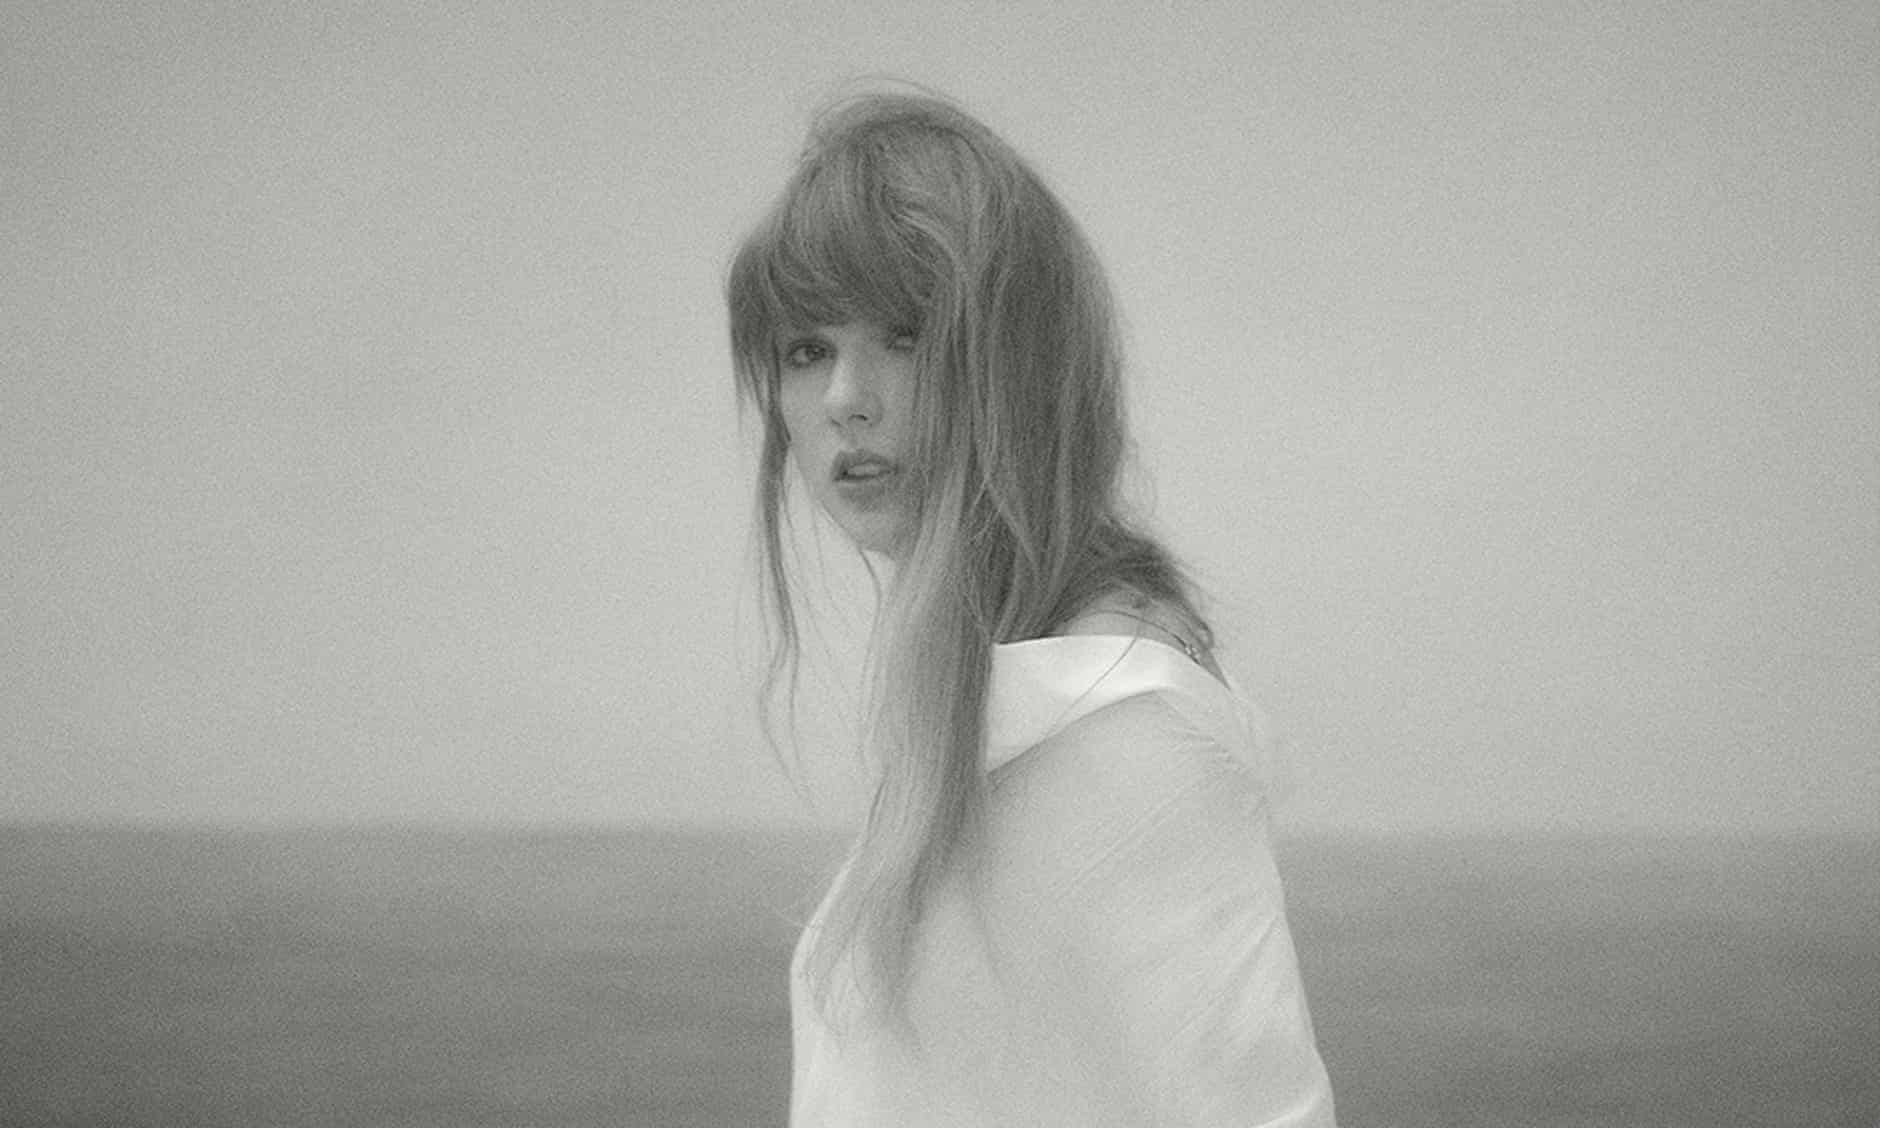 Taylor Swift kể chuyện sau chia tay trong album mới The Tortured Poets Department